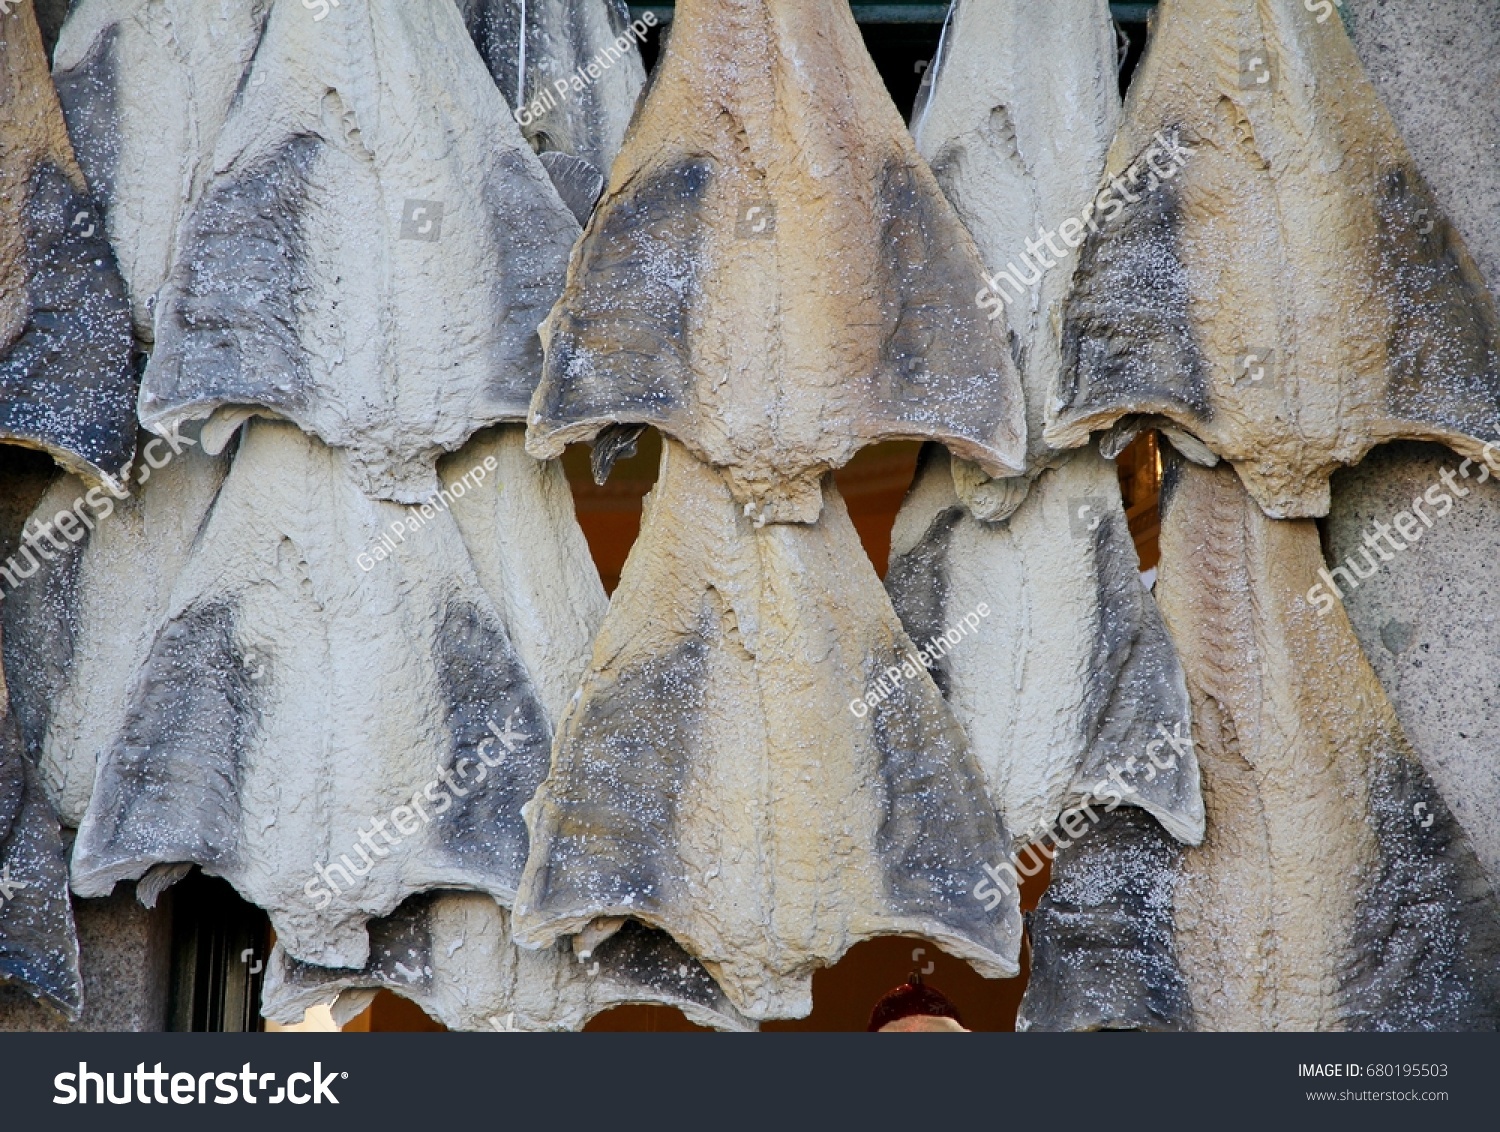 Salted cod hanging outside a shop in Porto, Portugal. #680195503